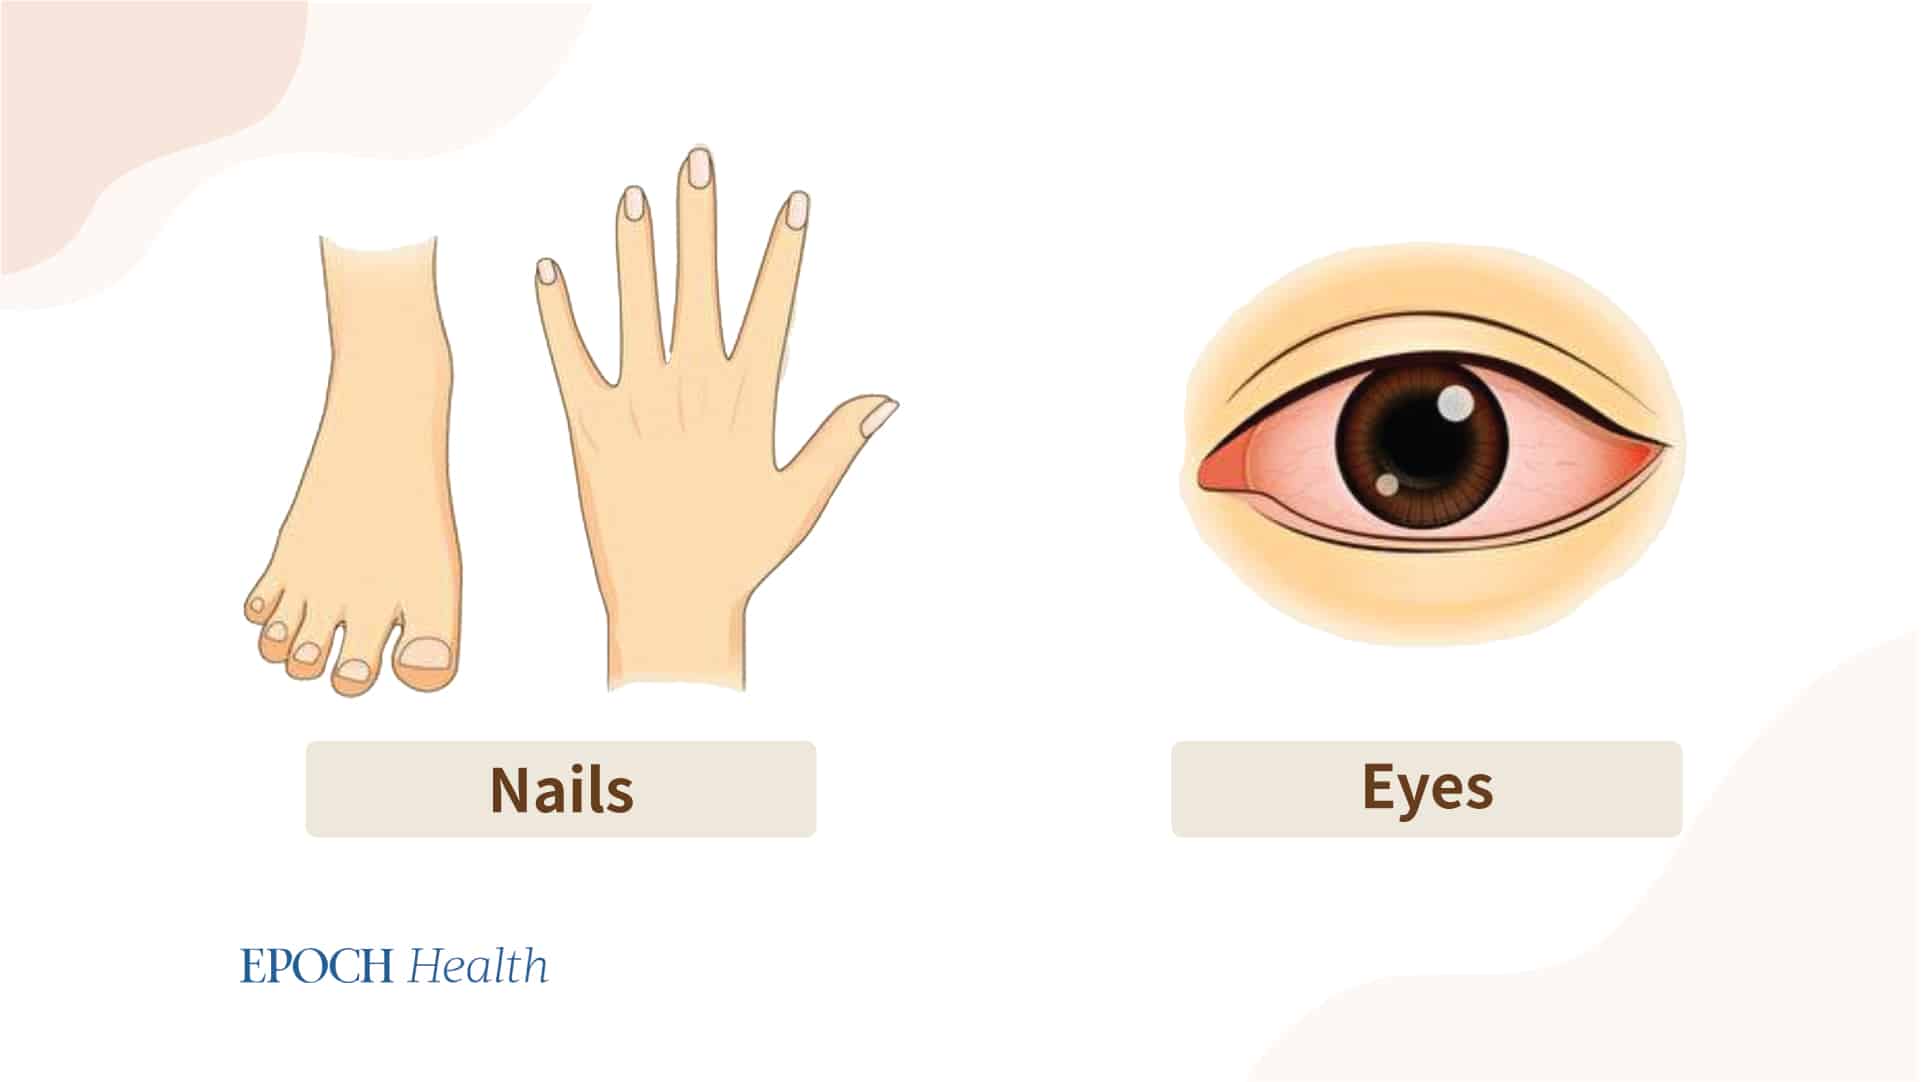 Traditional Chinese medicine can assess liver function by observing the appearance of the nails and eyes. 